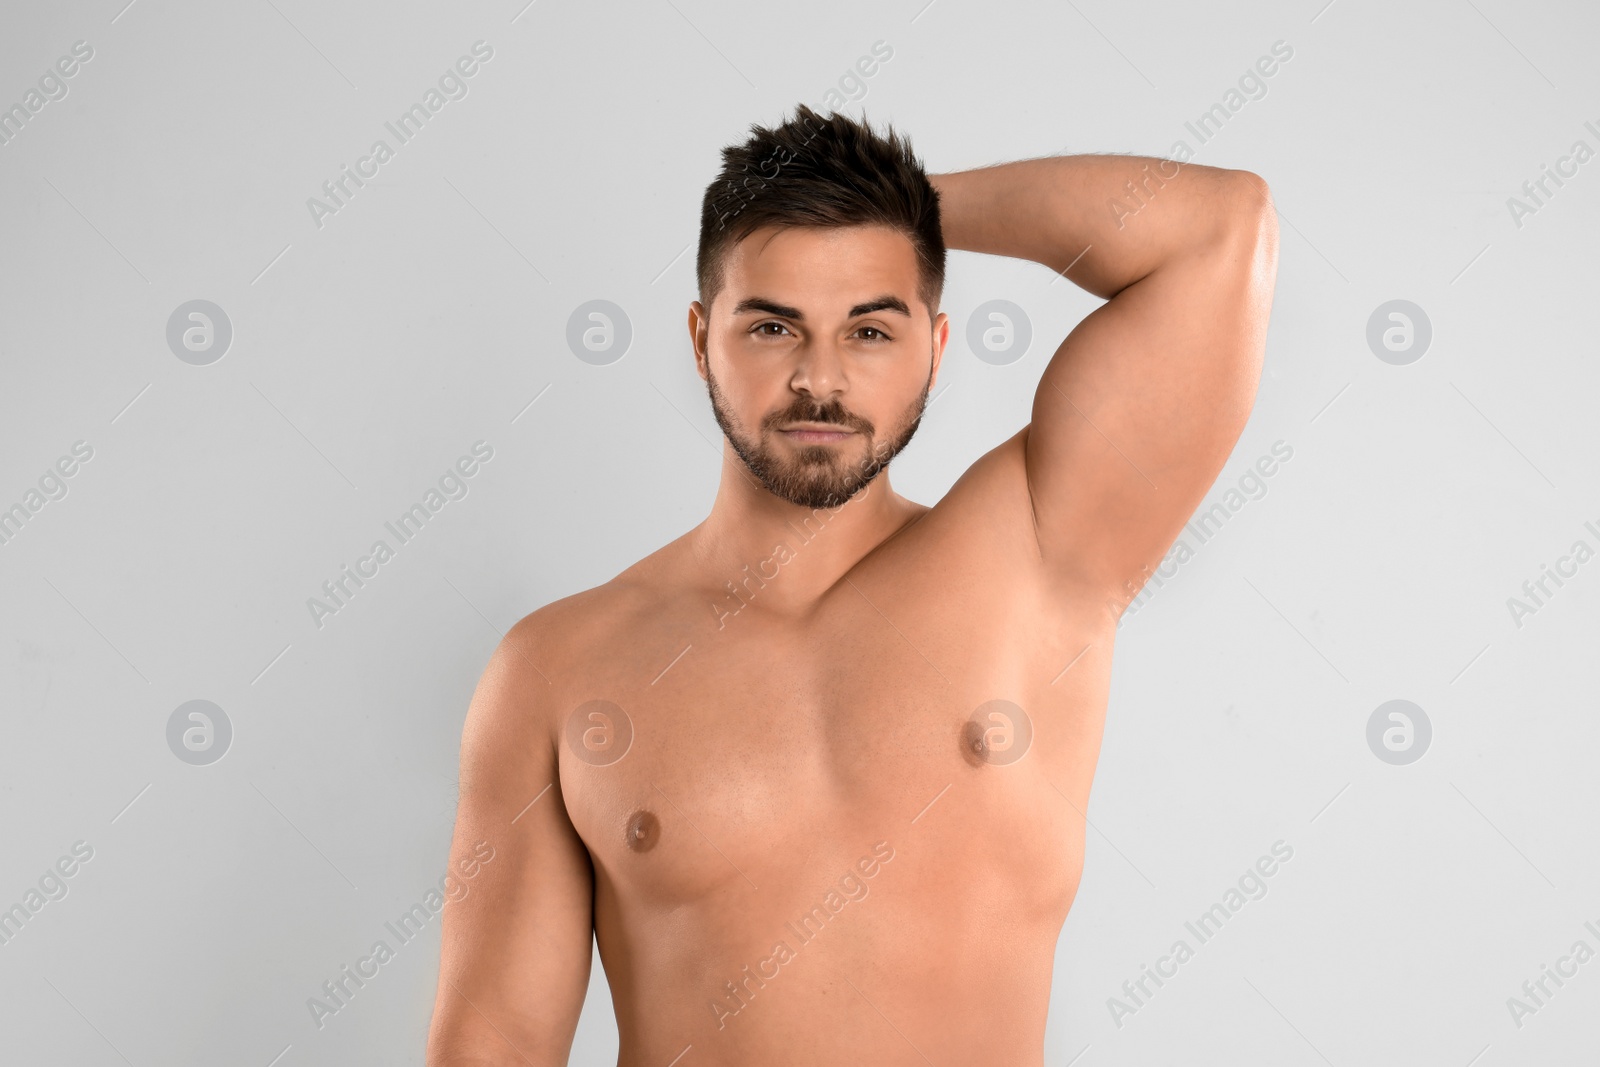 Photo of Young man showing hairless armpit after epilation procedure on light grey background